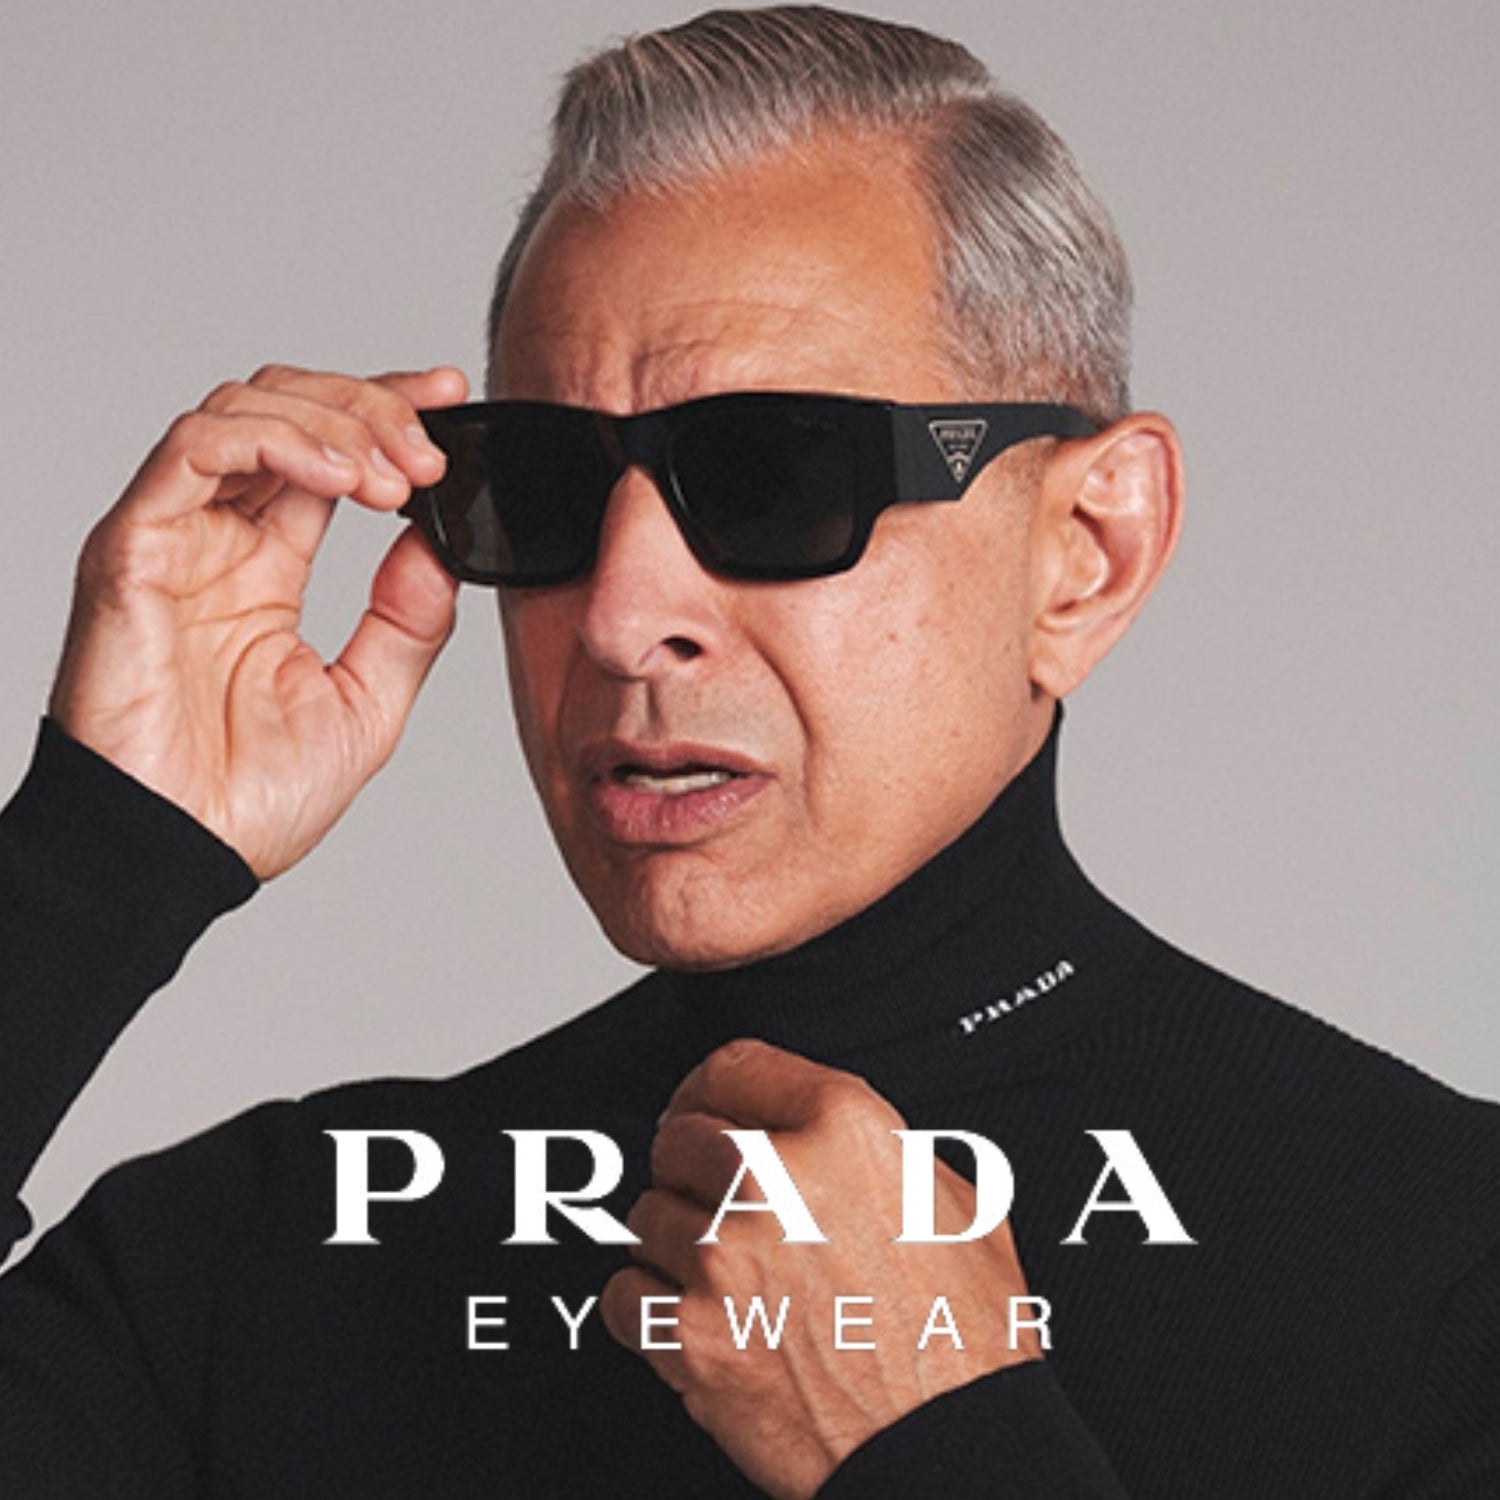 "Prada eyewear - stylish sunglasses and opticals for men and women, available at Optorium."